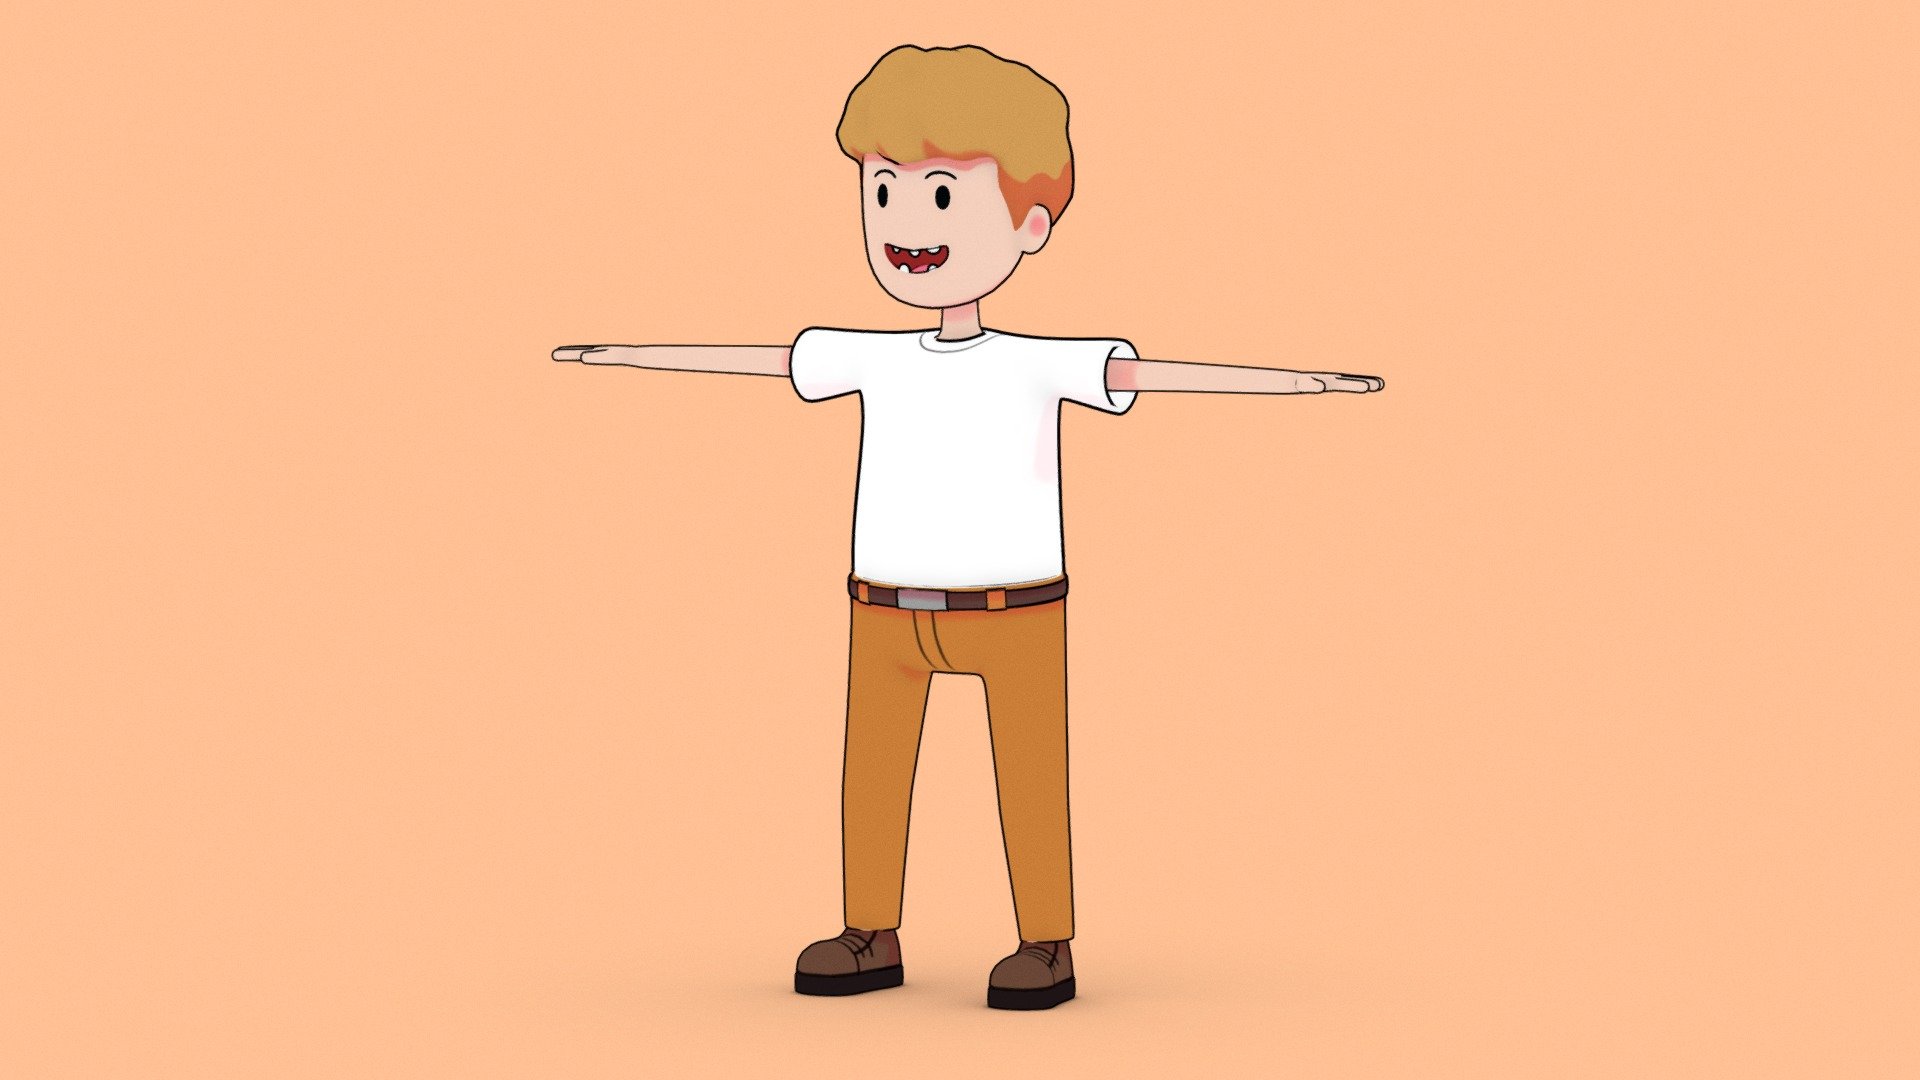 3D Toon Character 2D Style - 3D model by thillustrator (@thillustrator)  [0f7c80f]